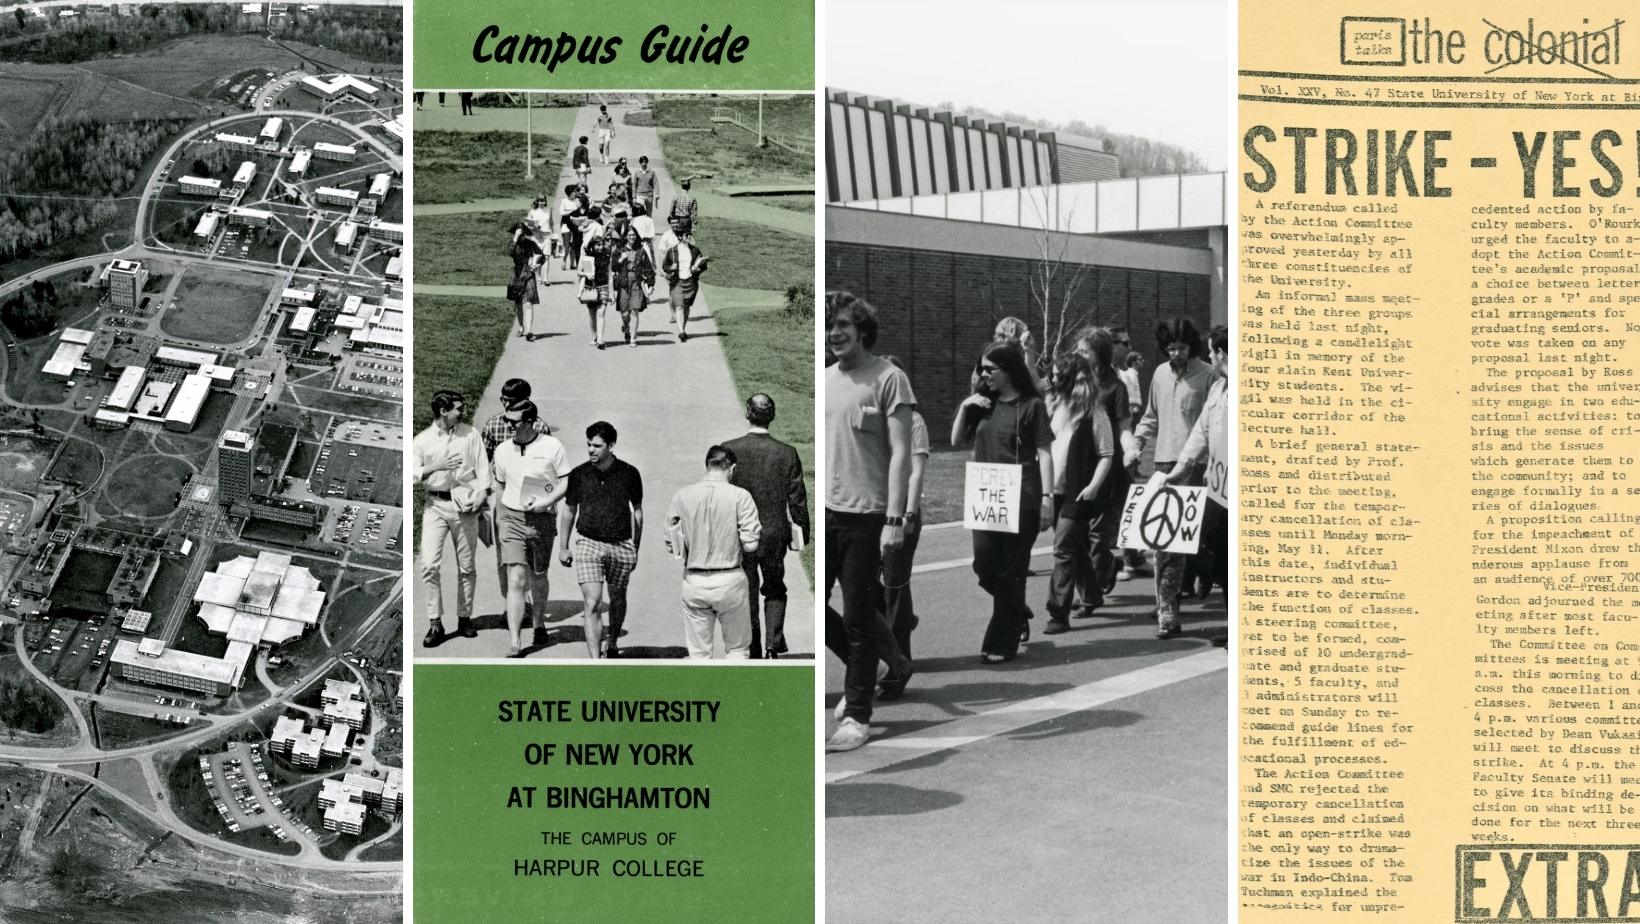 A collage of photographs and ephemera about campus and students